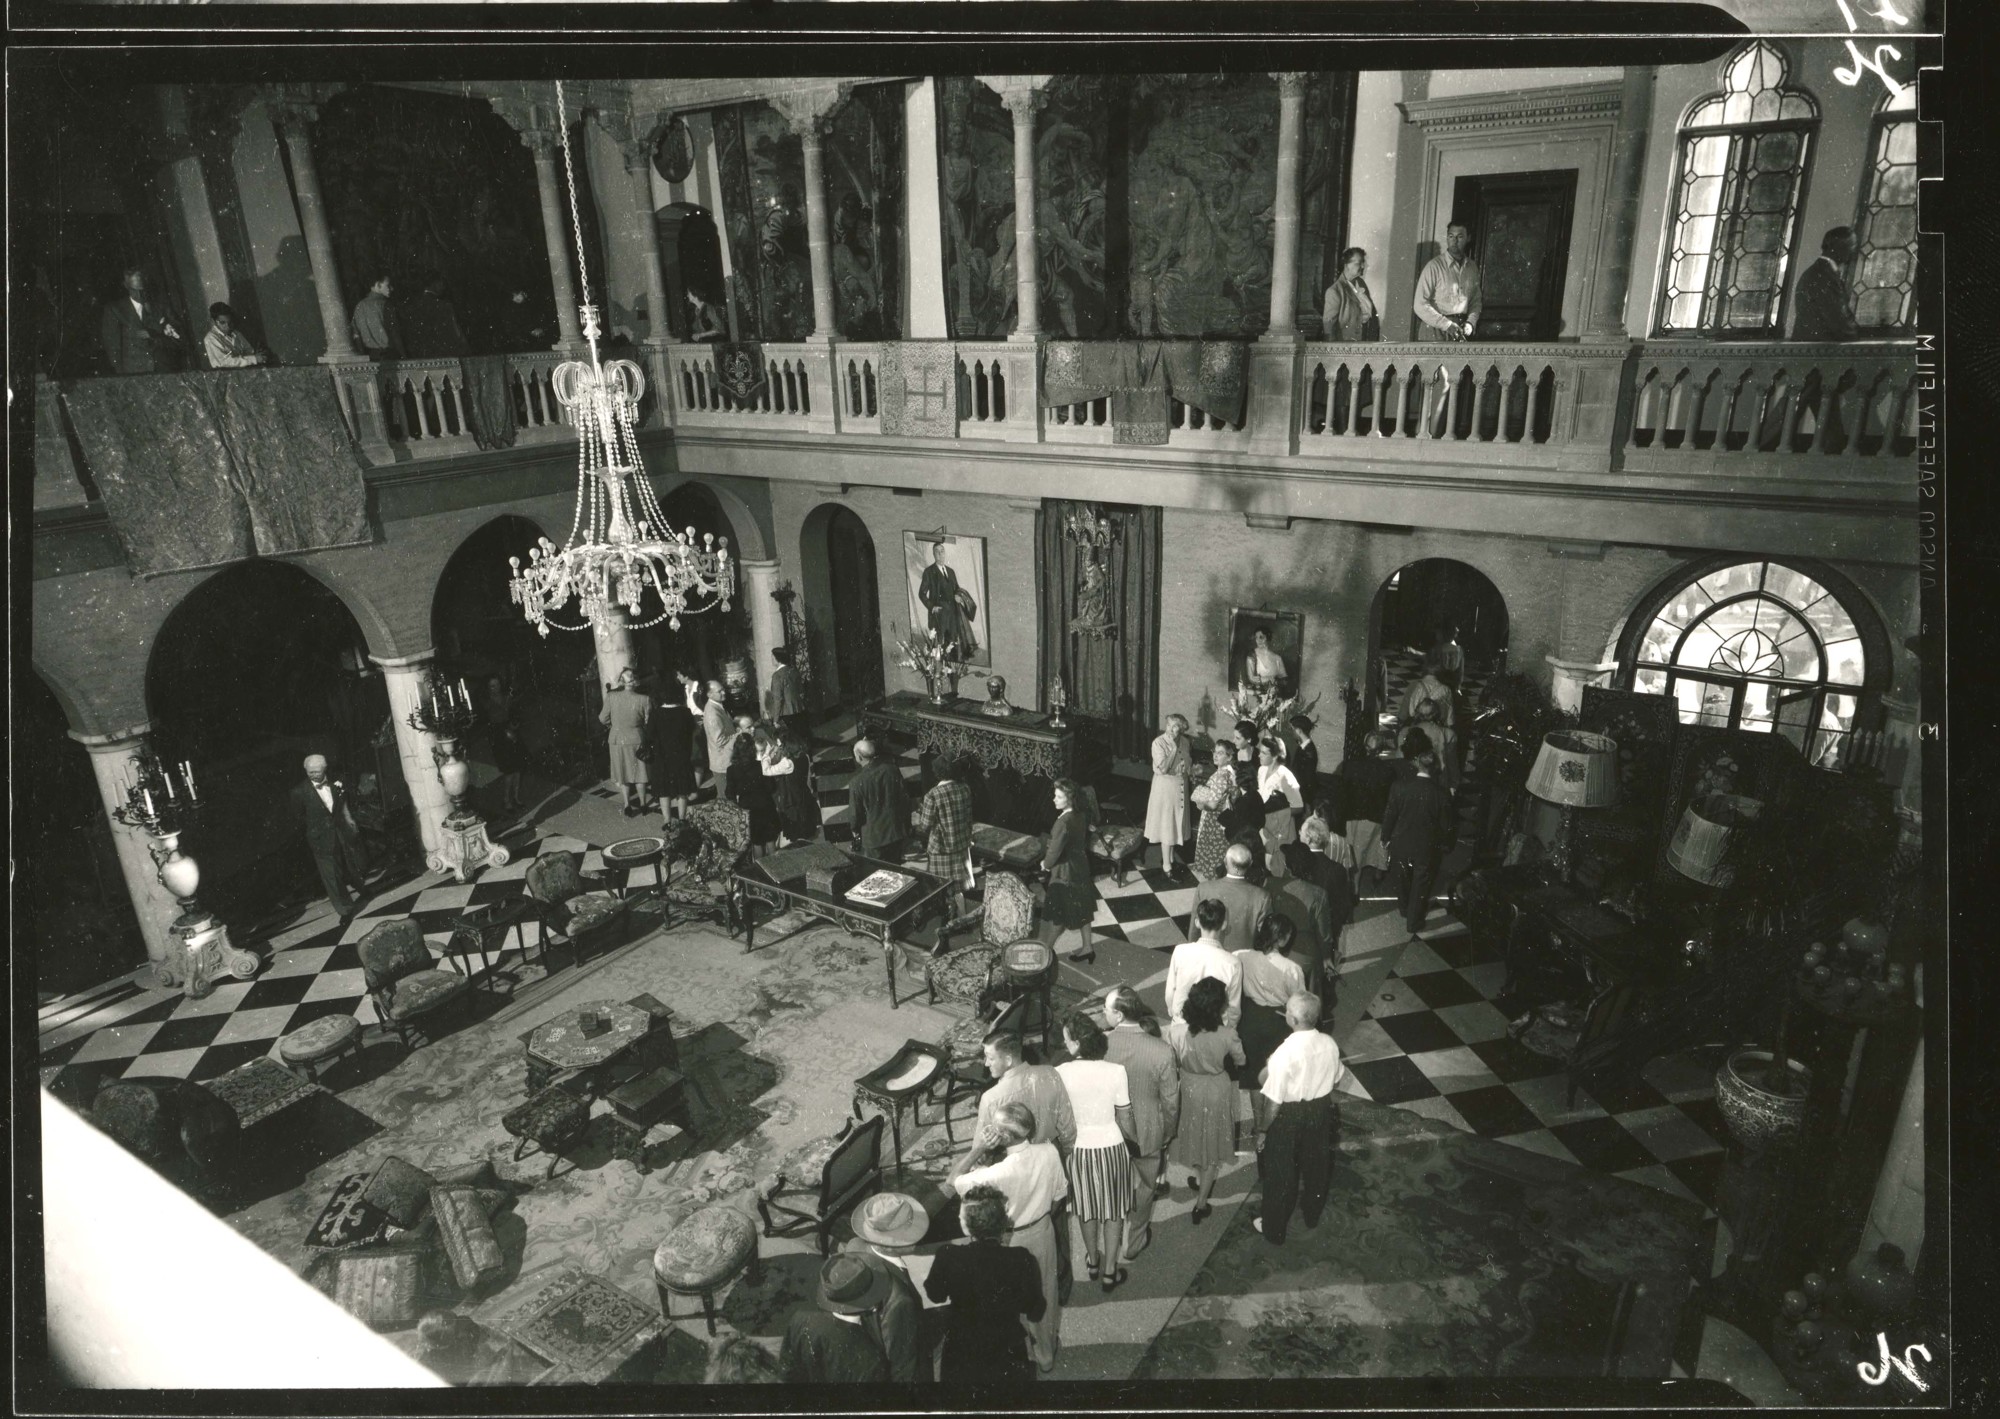 Completed in 1926, the Cà d'Zan was home to extravagant parties.